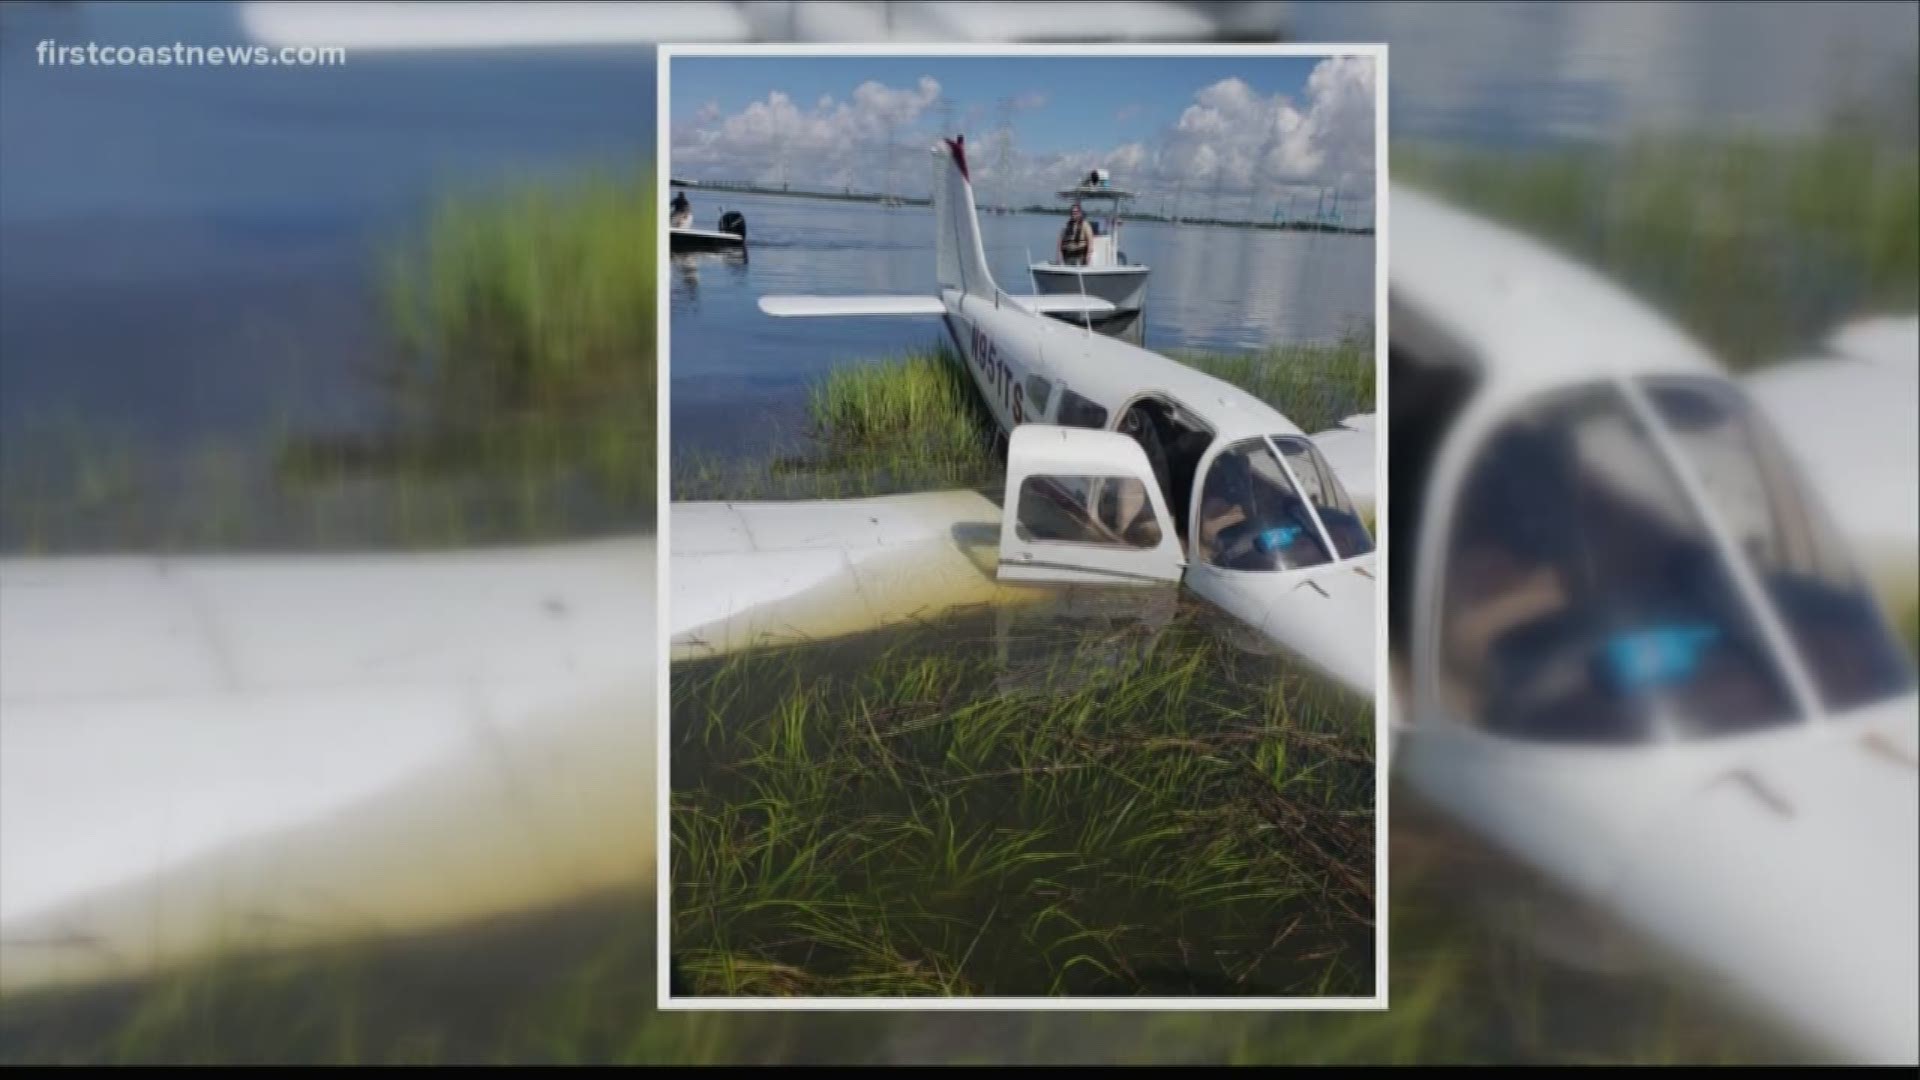 The lone occupant of the plane was picked up by a good samaritan, JFRD said.